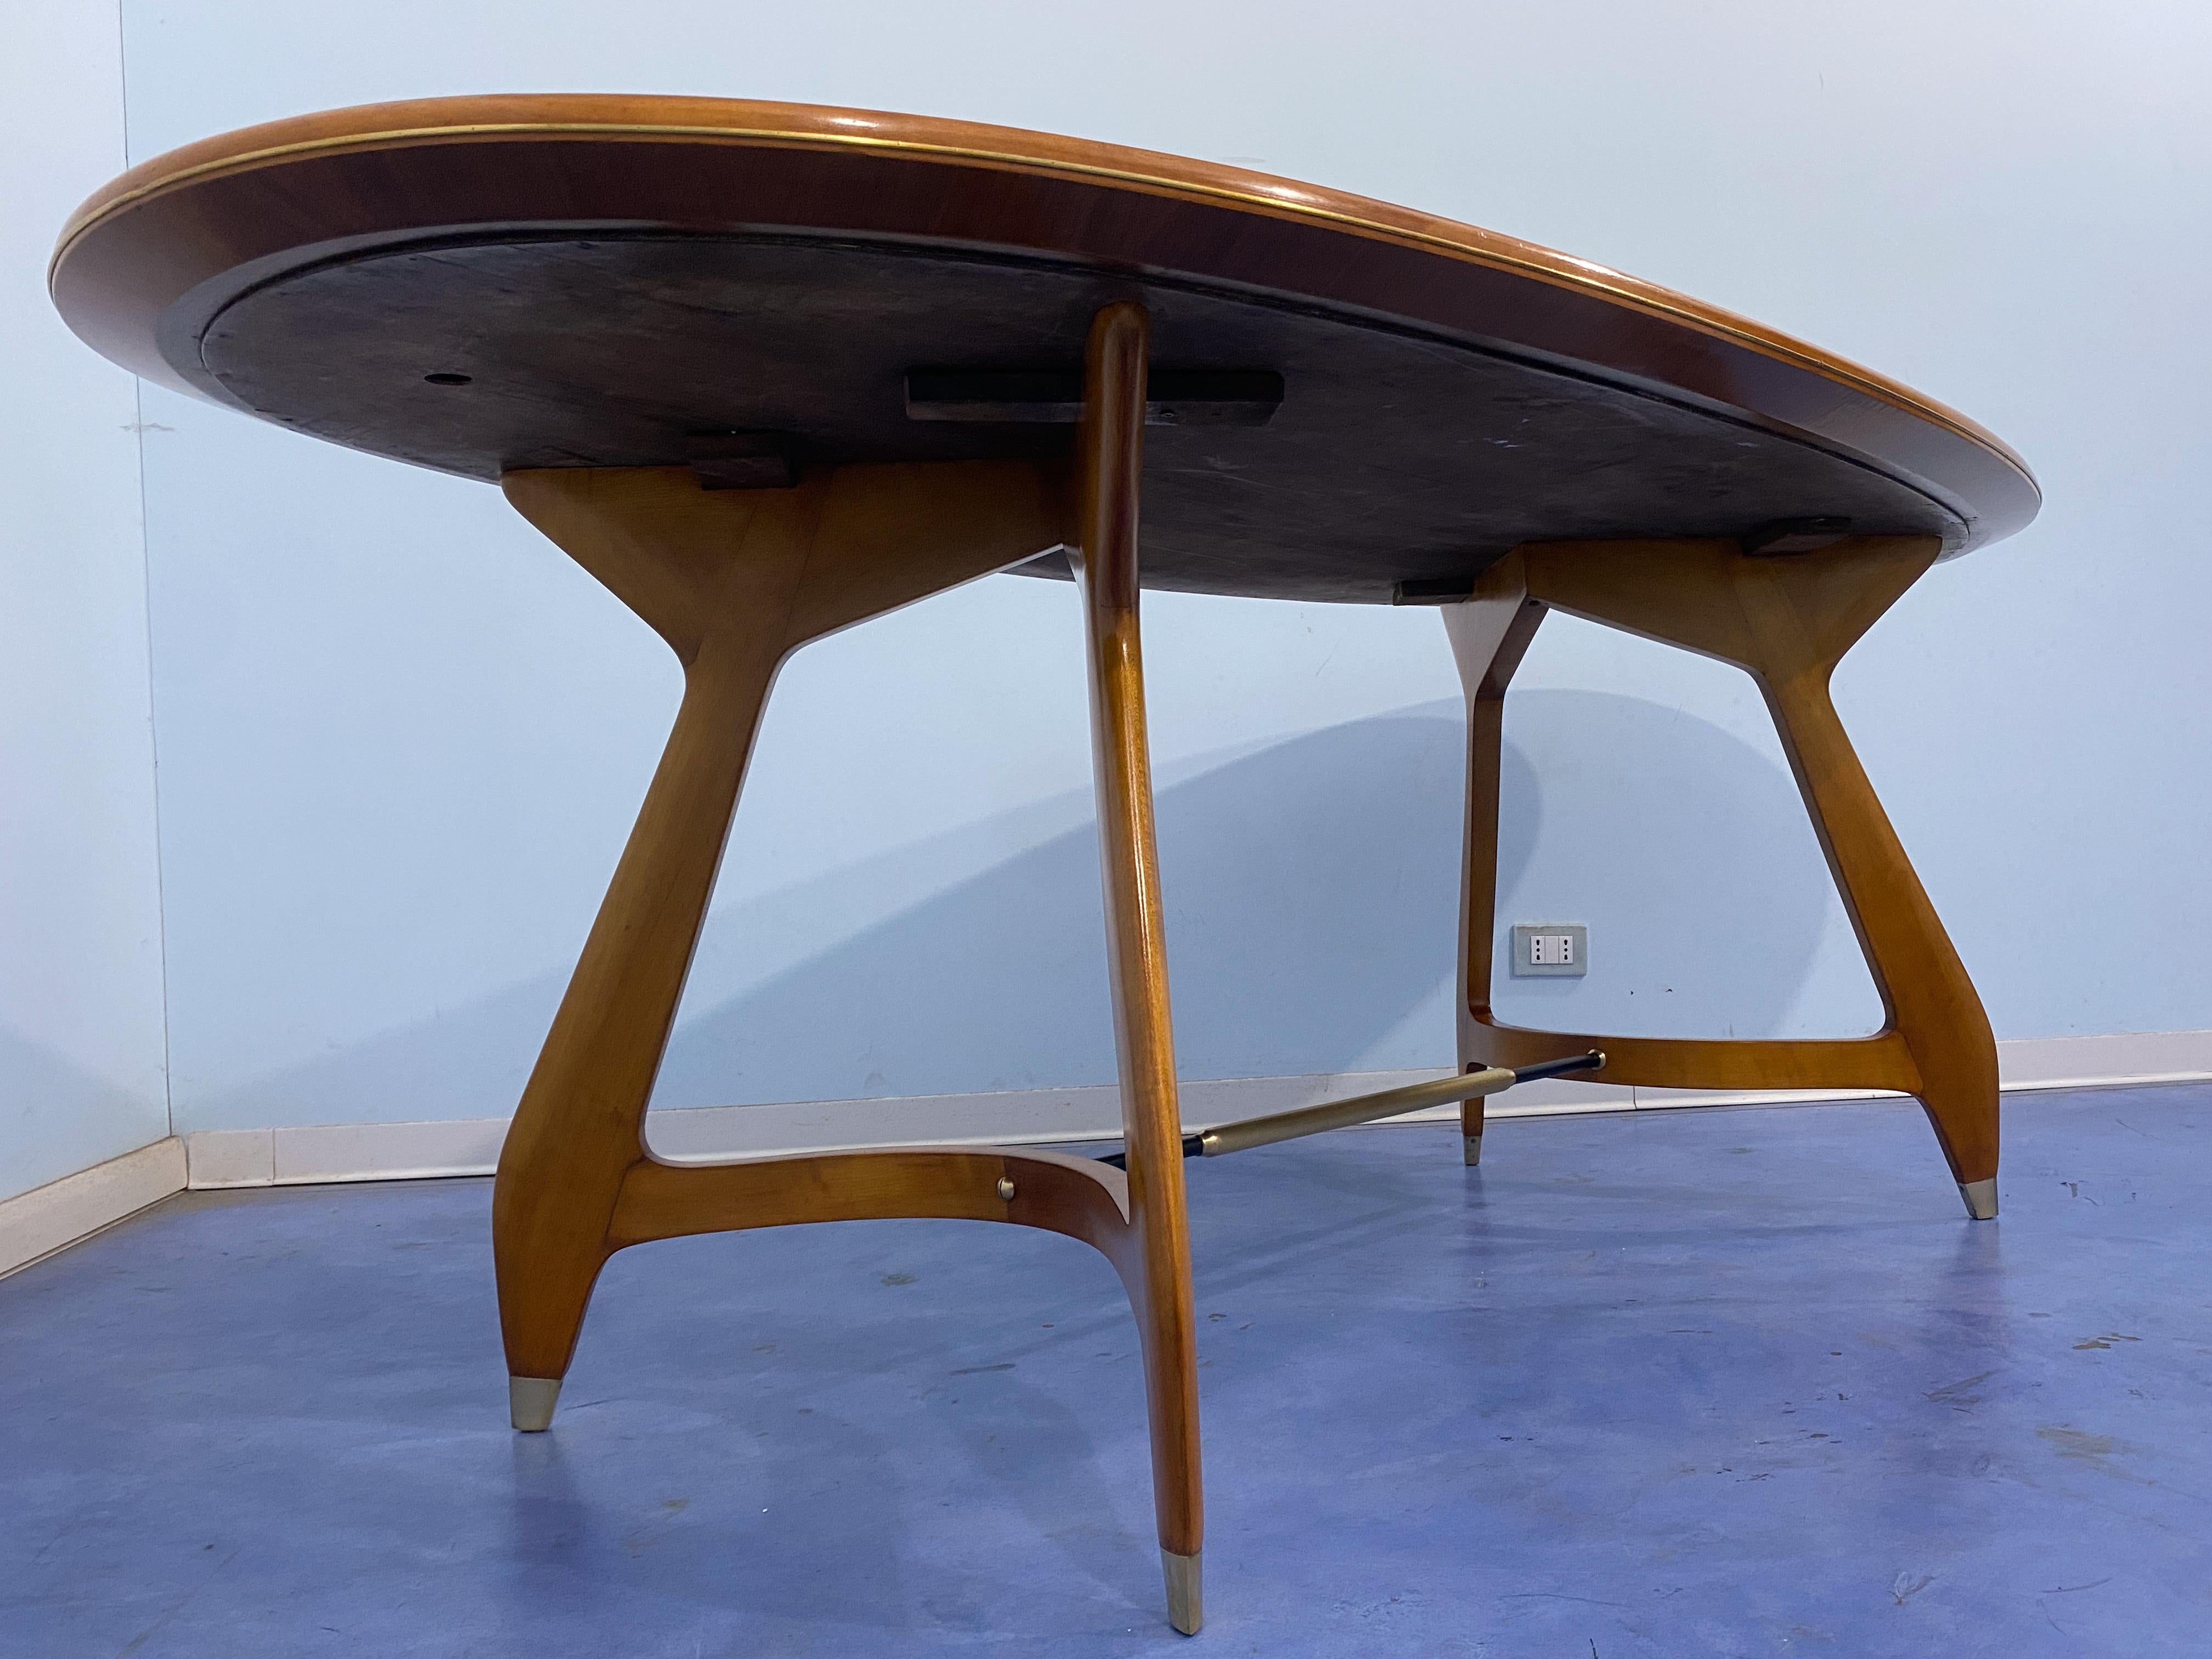 Italian Midcentury Green Olive Dining Table by Vittorio Dassi, 1950s For Sale 11